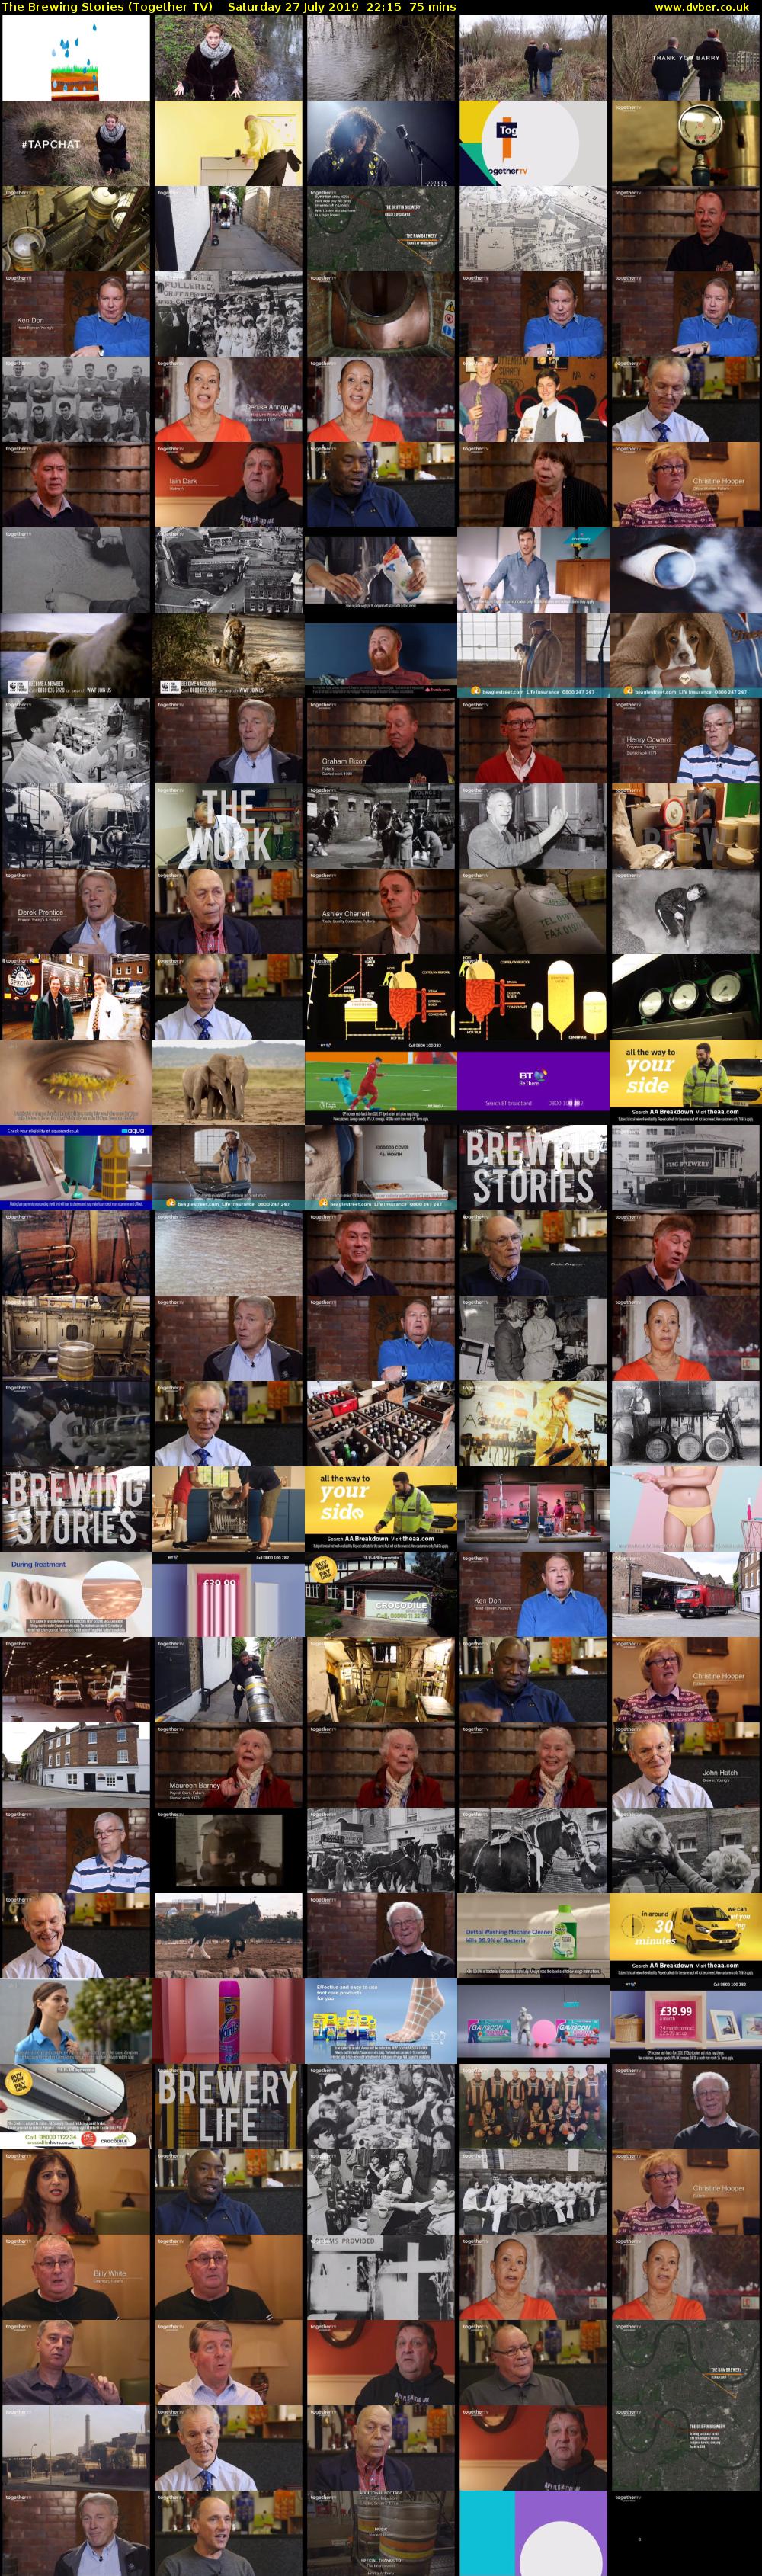 The Brewing Stories (Together TV) Saturday 27 July 2019 22:15 - 23:30